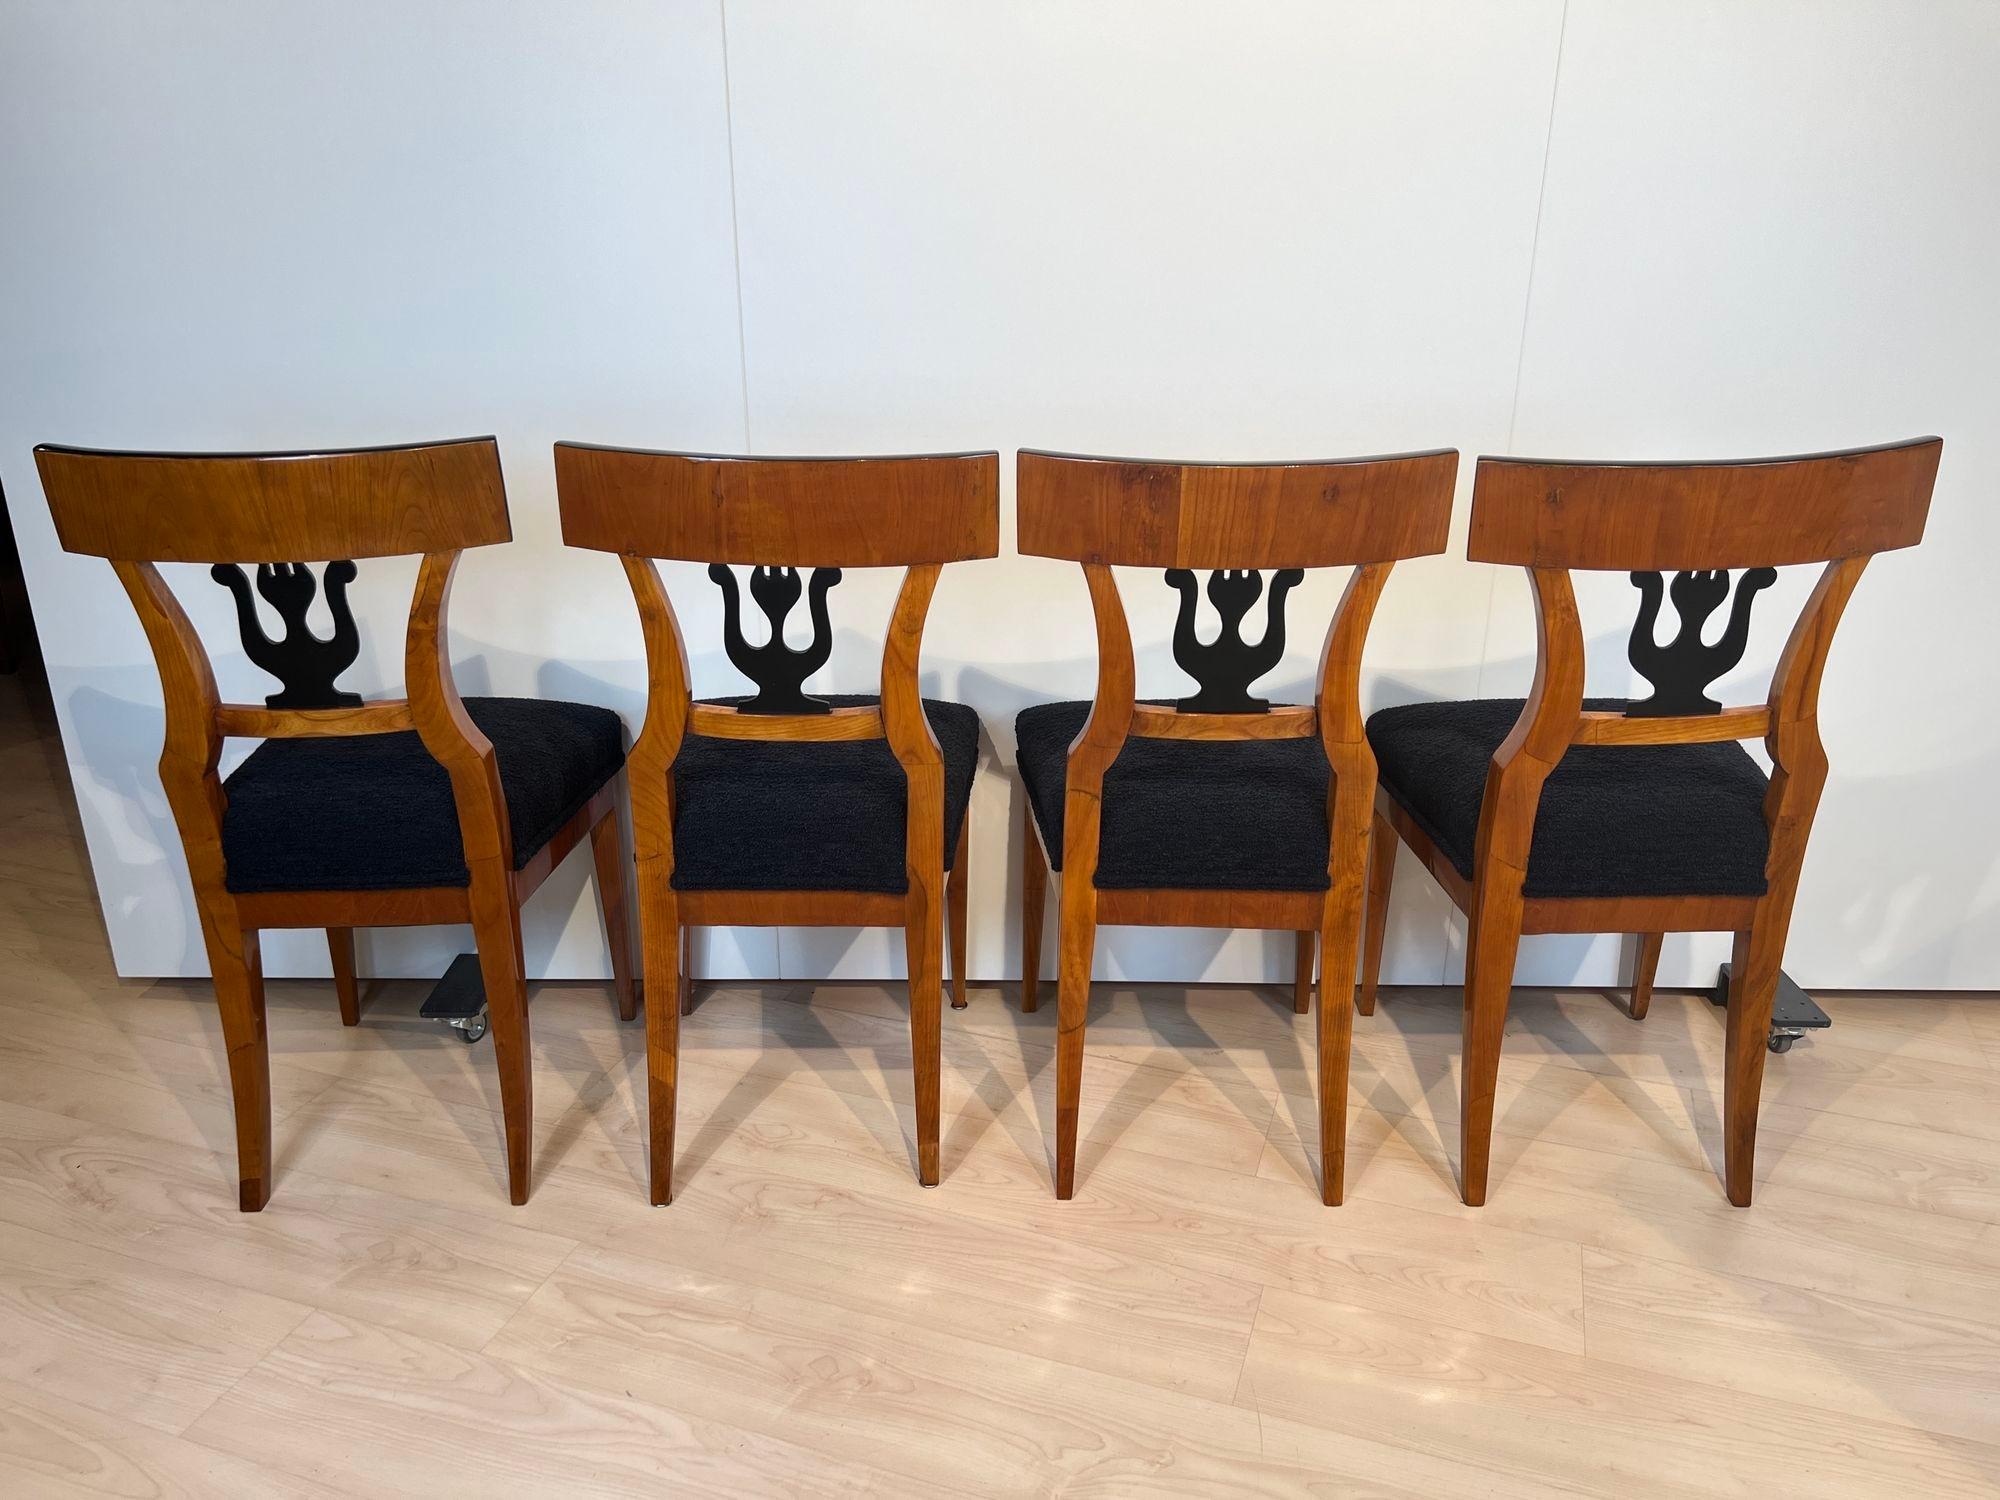 Set of Four Biedermeier Chairs, Cherry Veneer, South Germany circa 1830 In Good Condition For Sale In Regensburg, DE